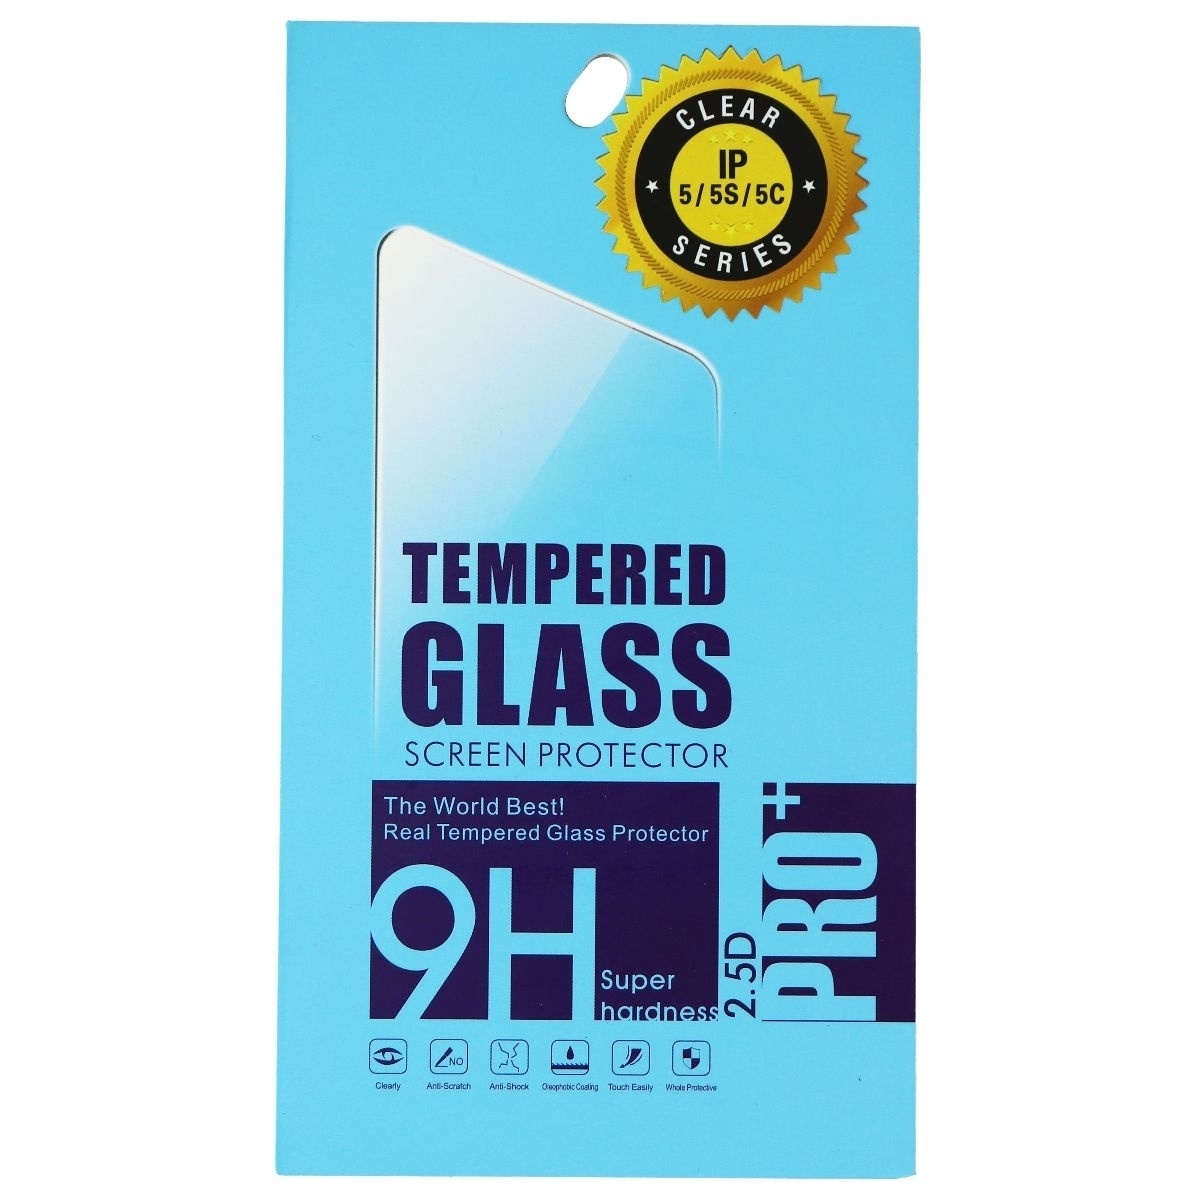 Unbranded Tempered Glass Screen Protector For Apple IPhone 5/5s/5c - Clear